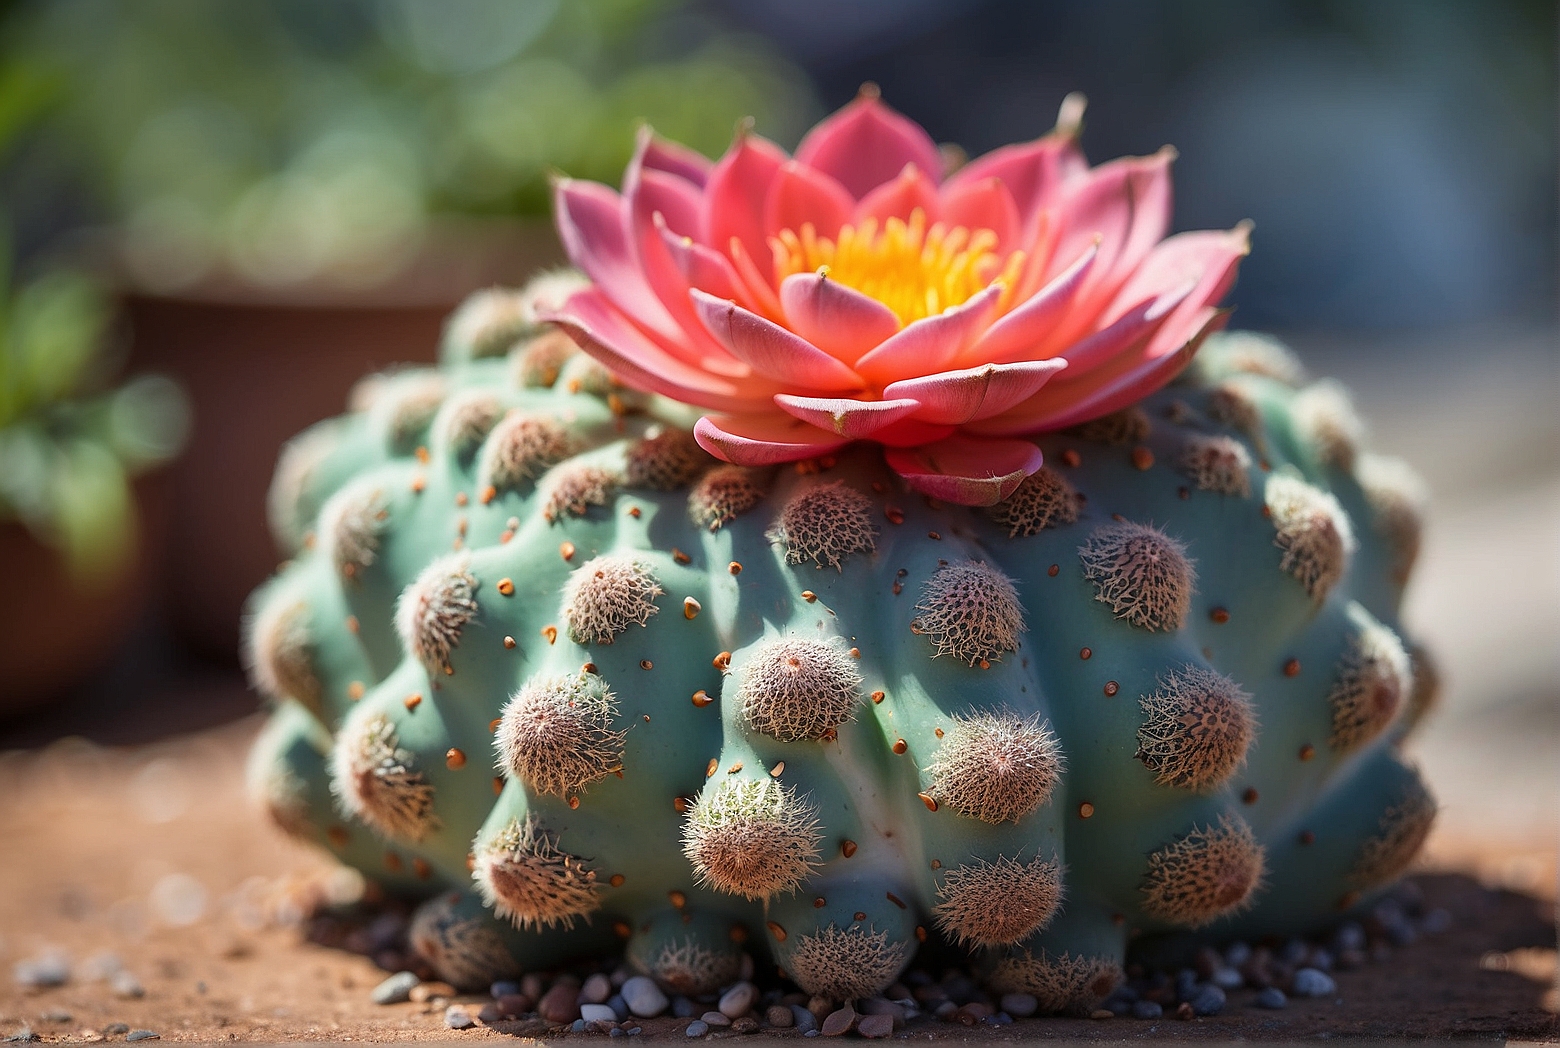 Guide to Caring for Your Peyote Cactus